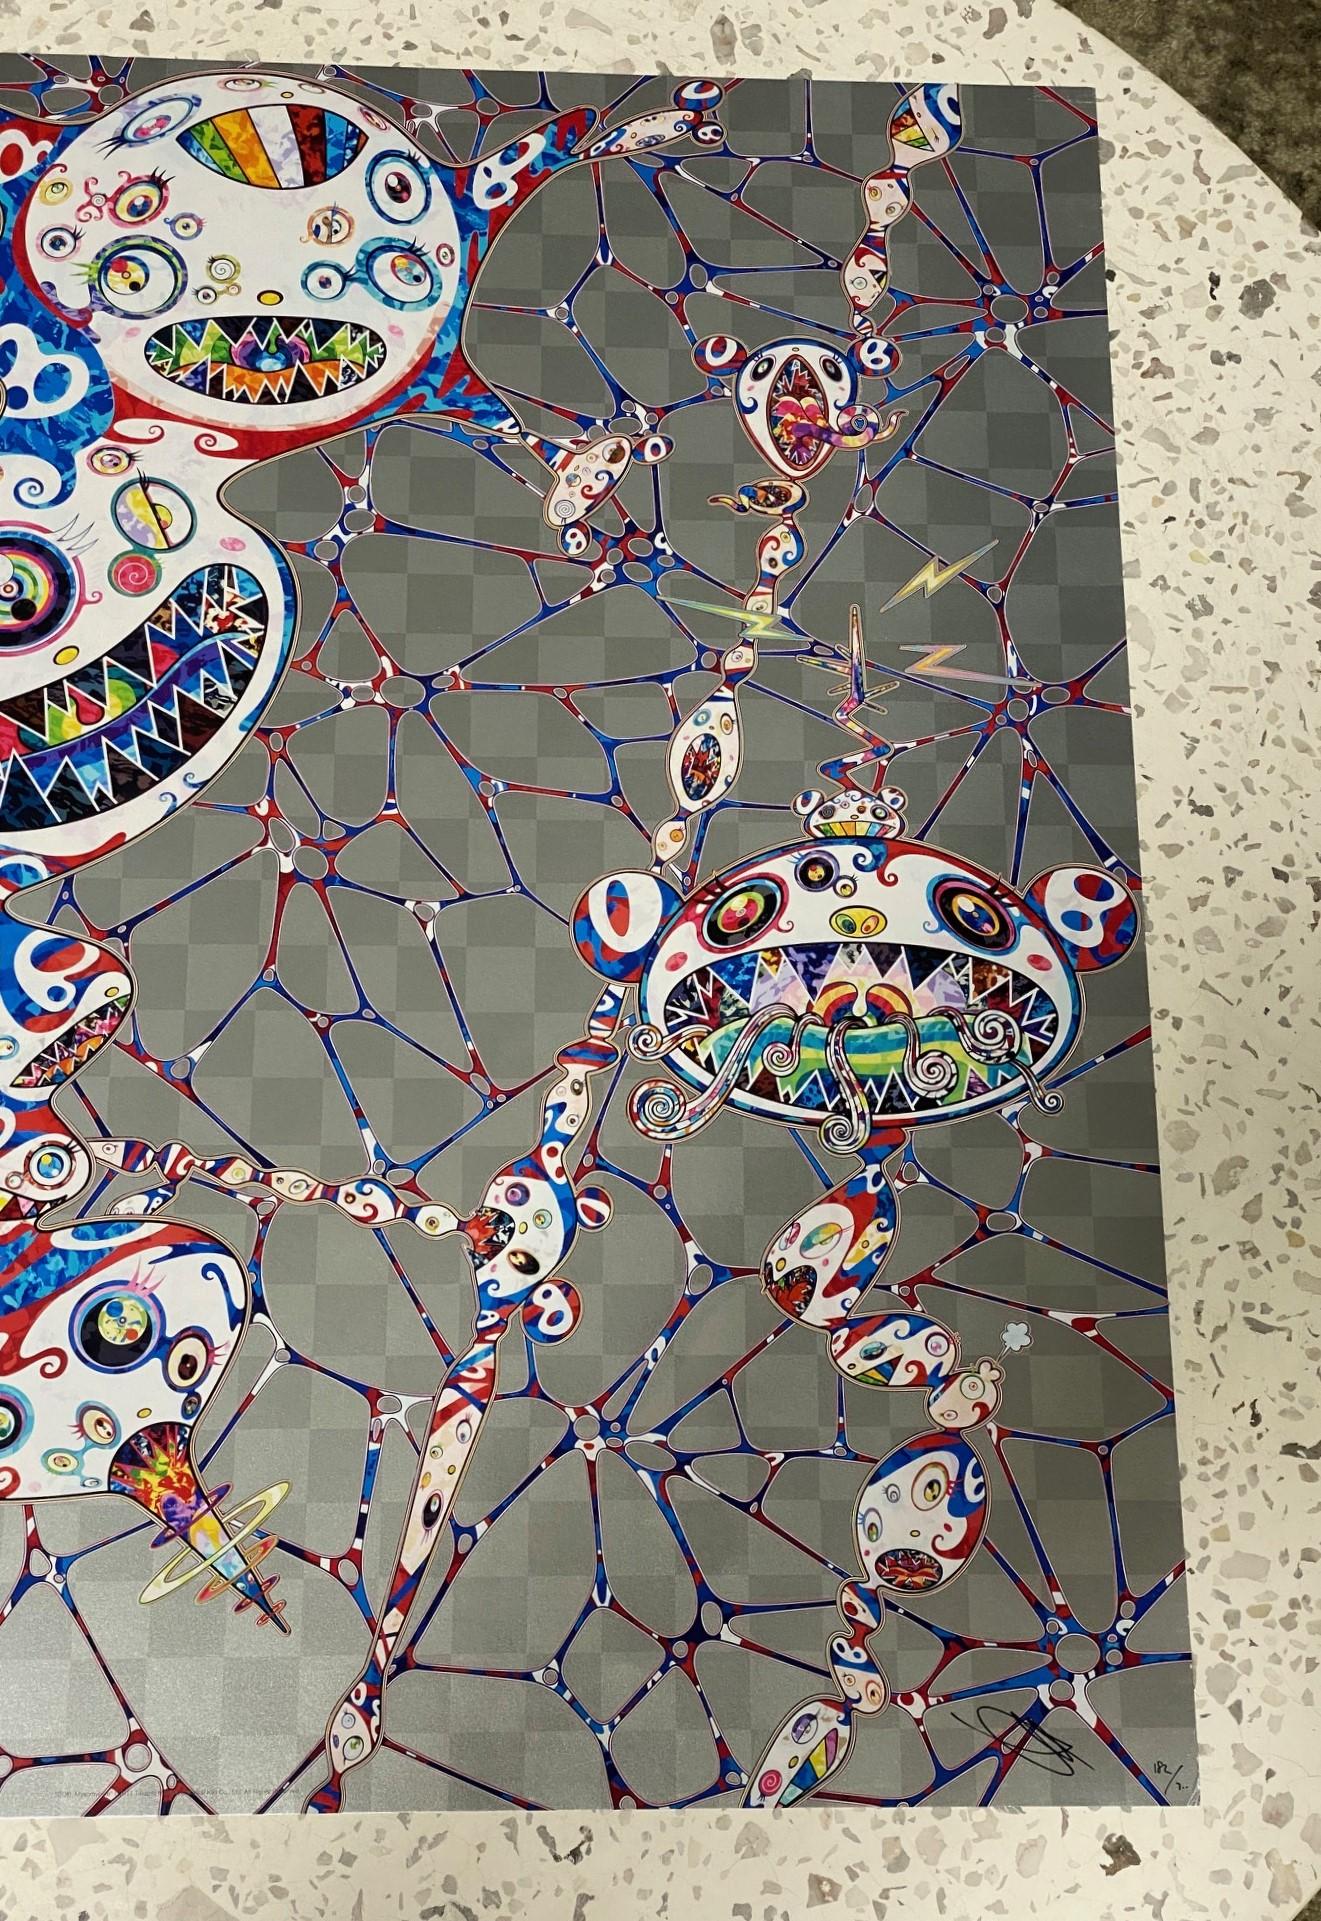 Takashi Murakami Signed Limited Edition Superflat Japanese Print DOB Myxomycete In Good Condition For Sale In Studio City, CA